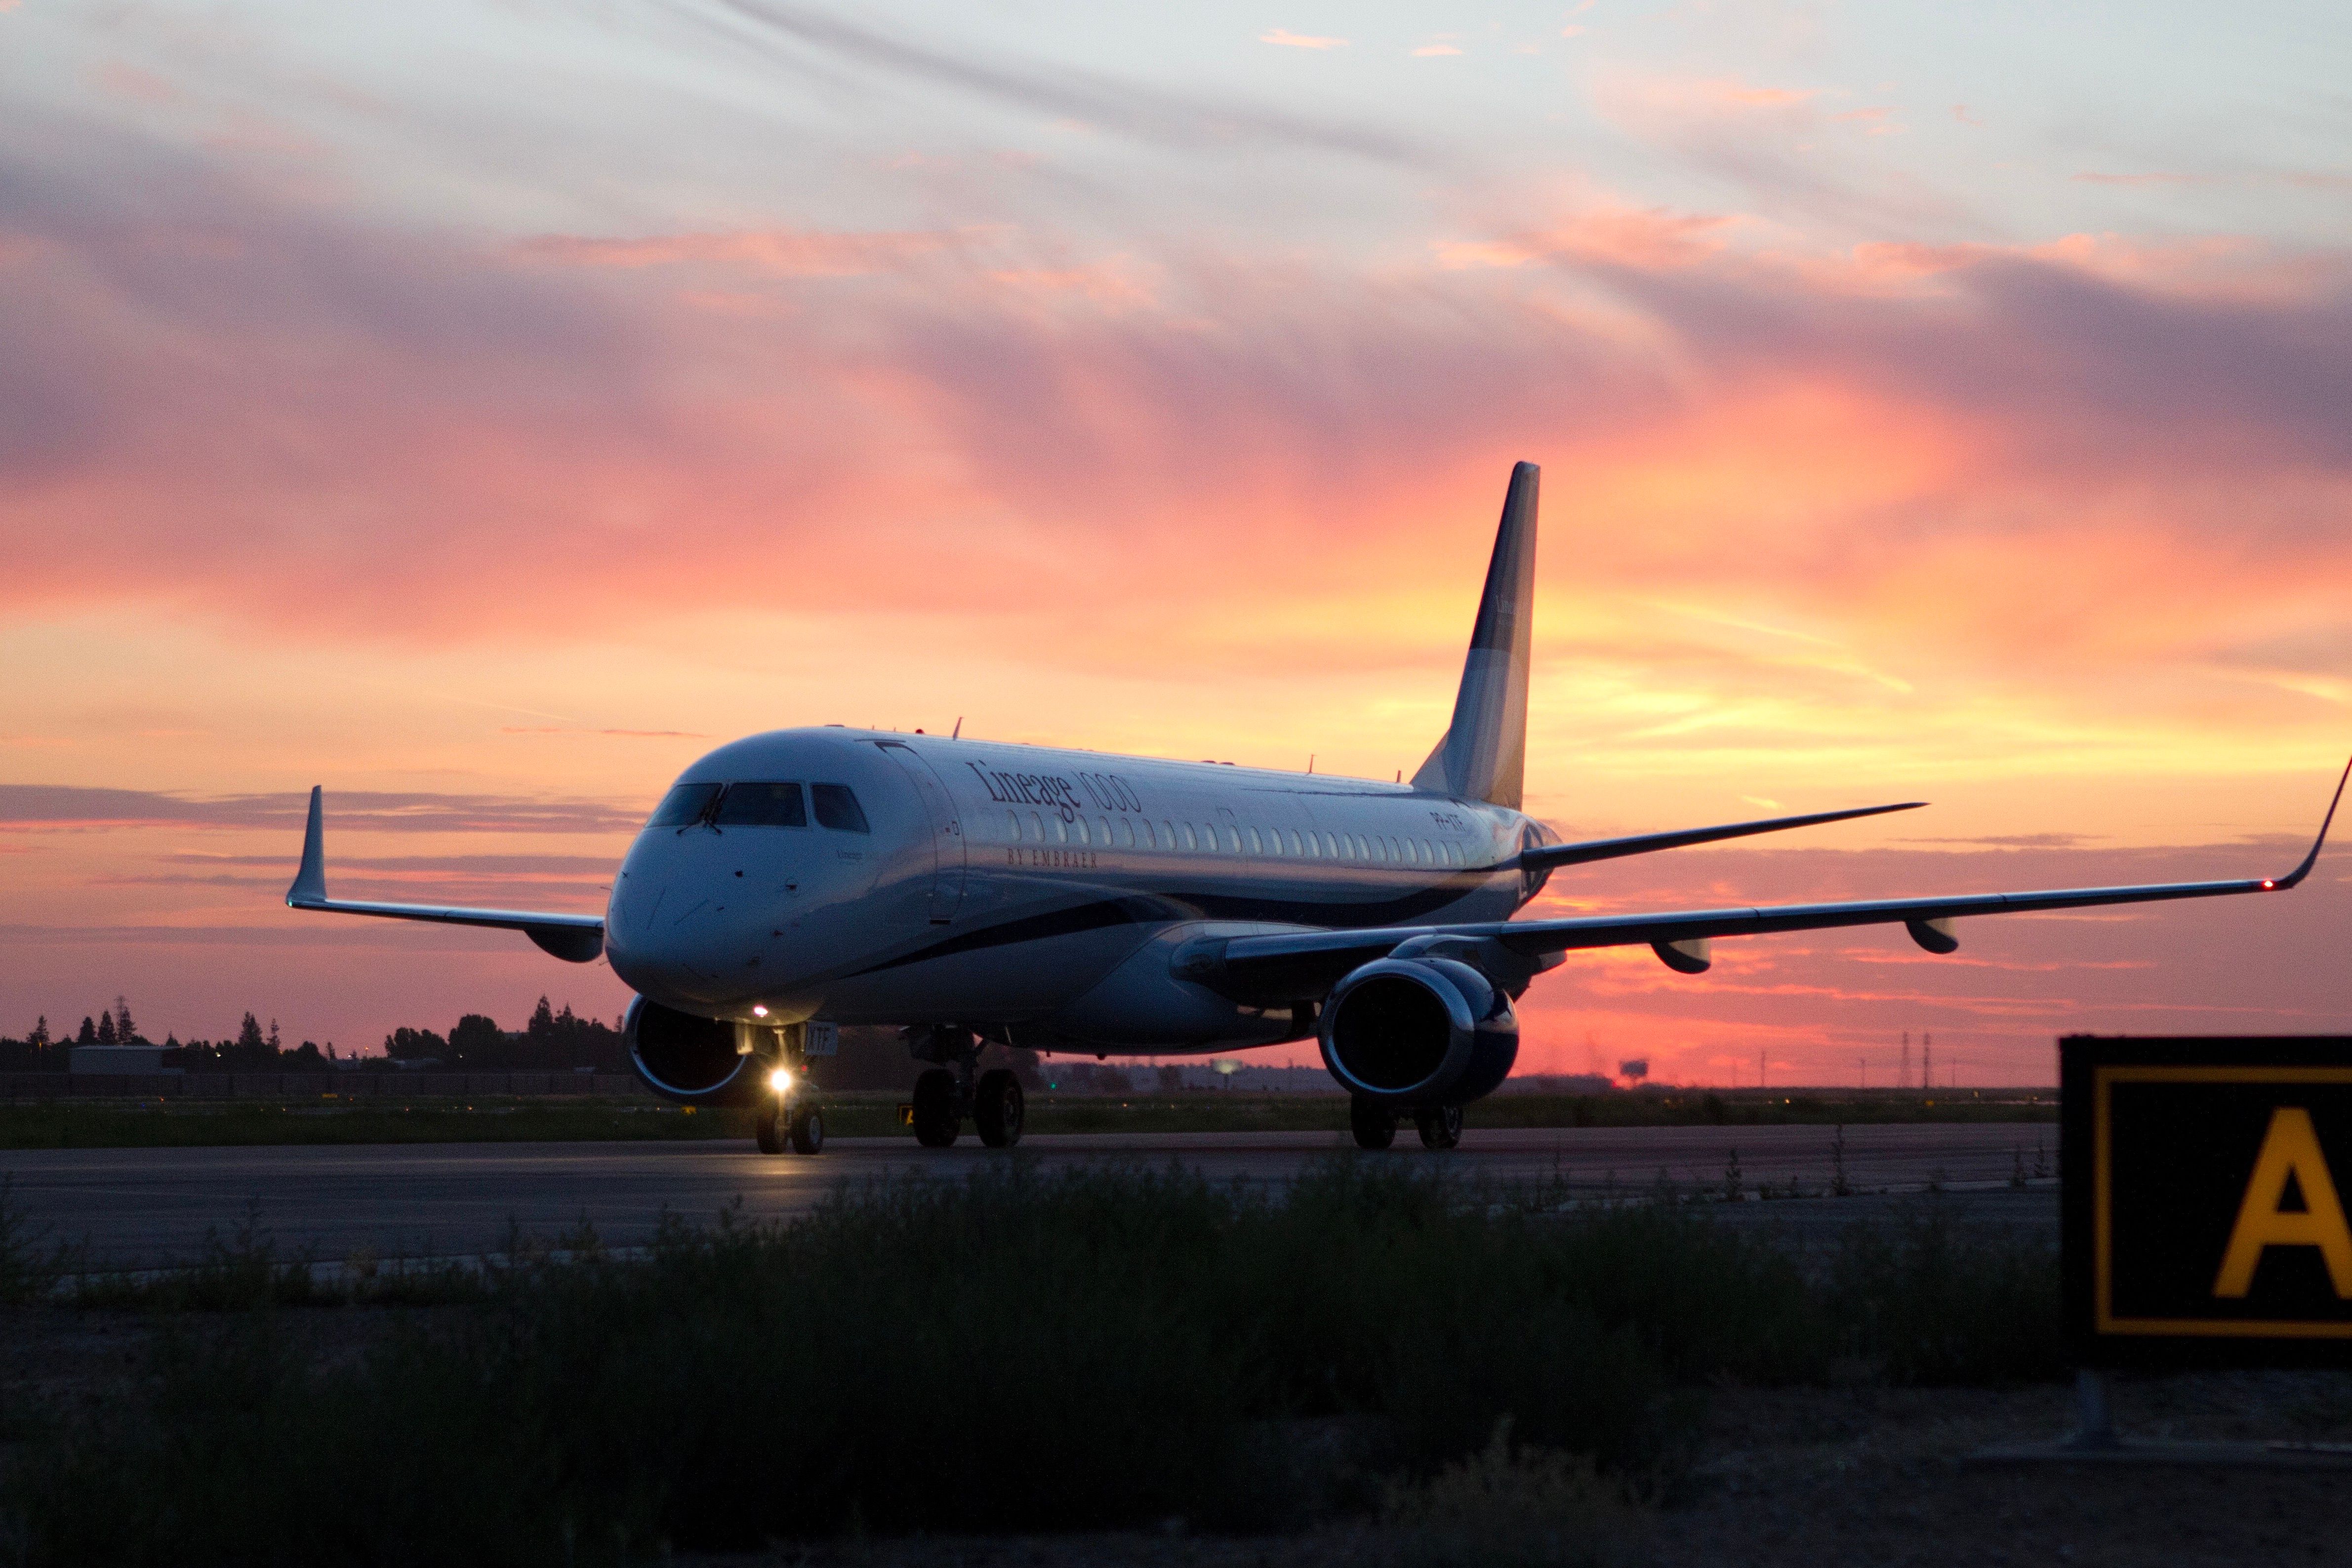 An Embraer Lineage 1000 on the ground during sunset.